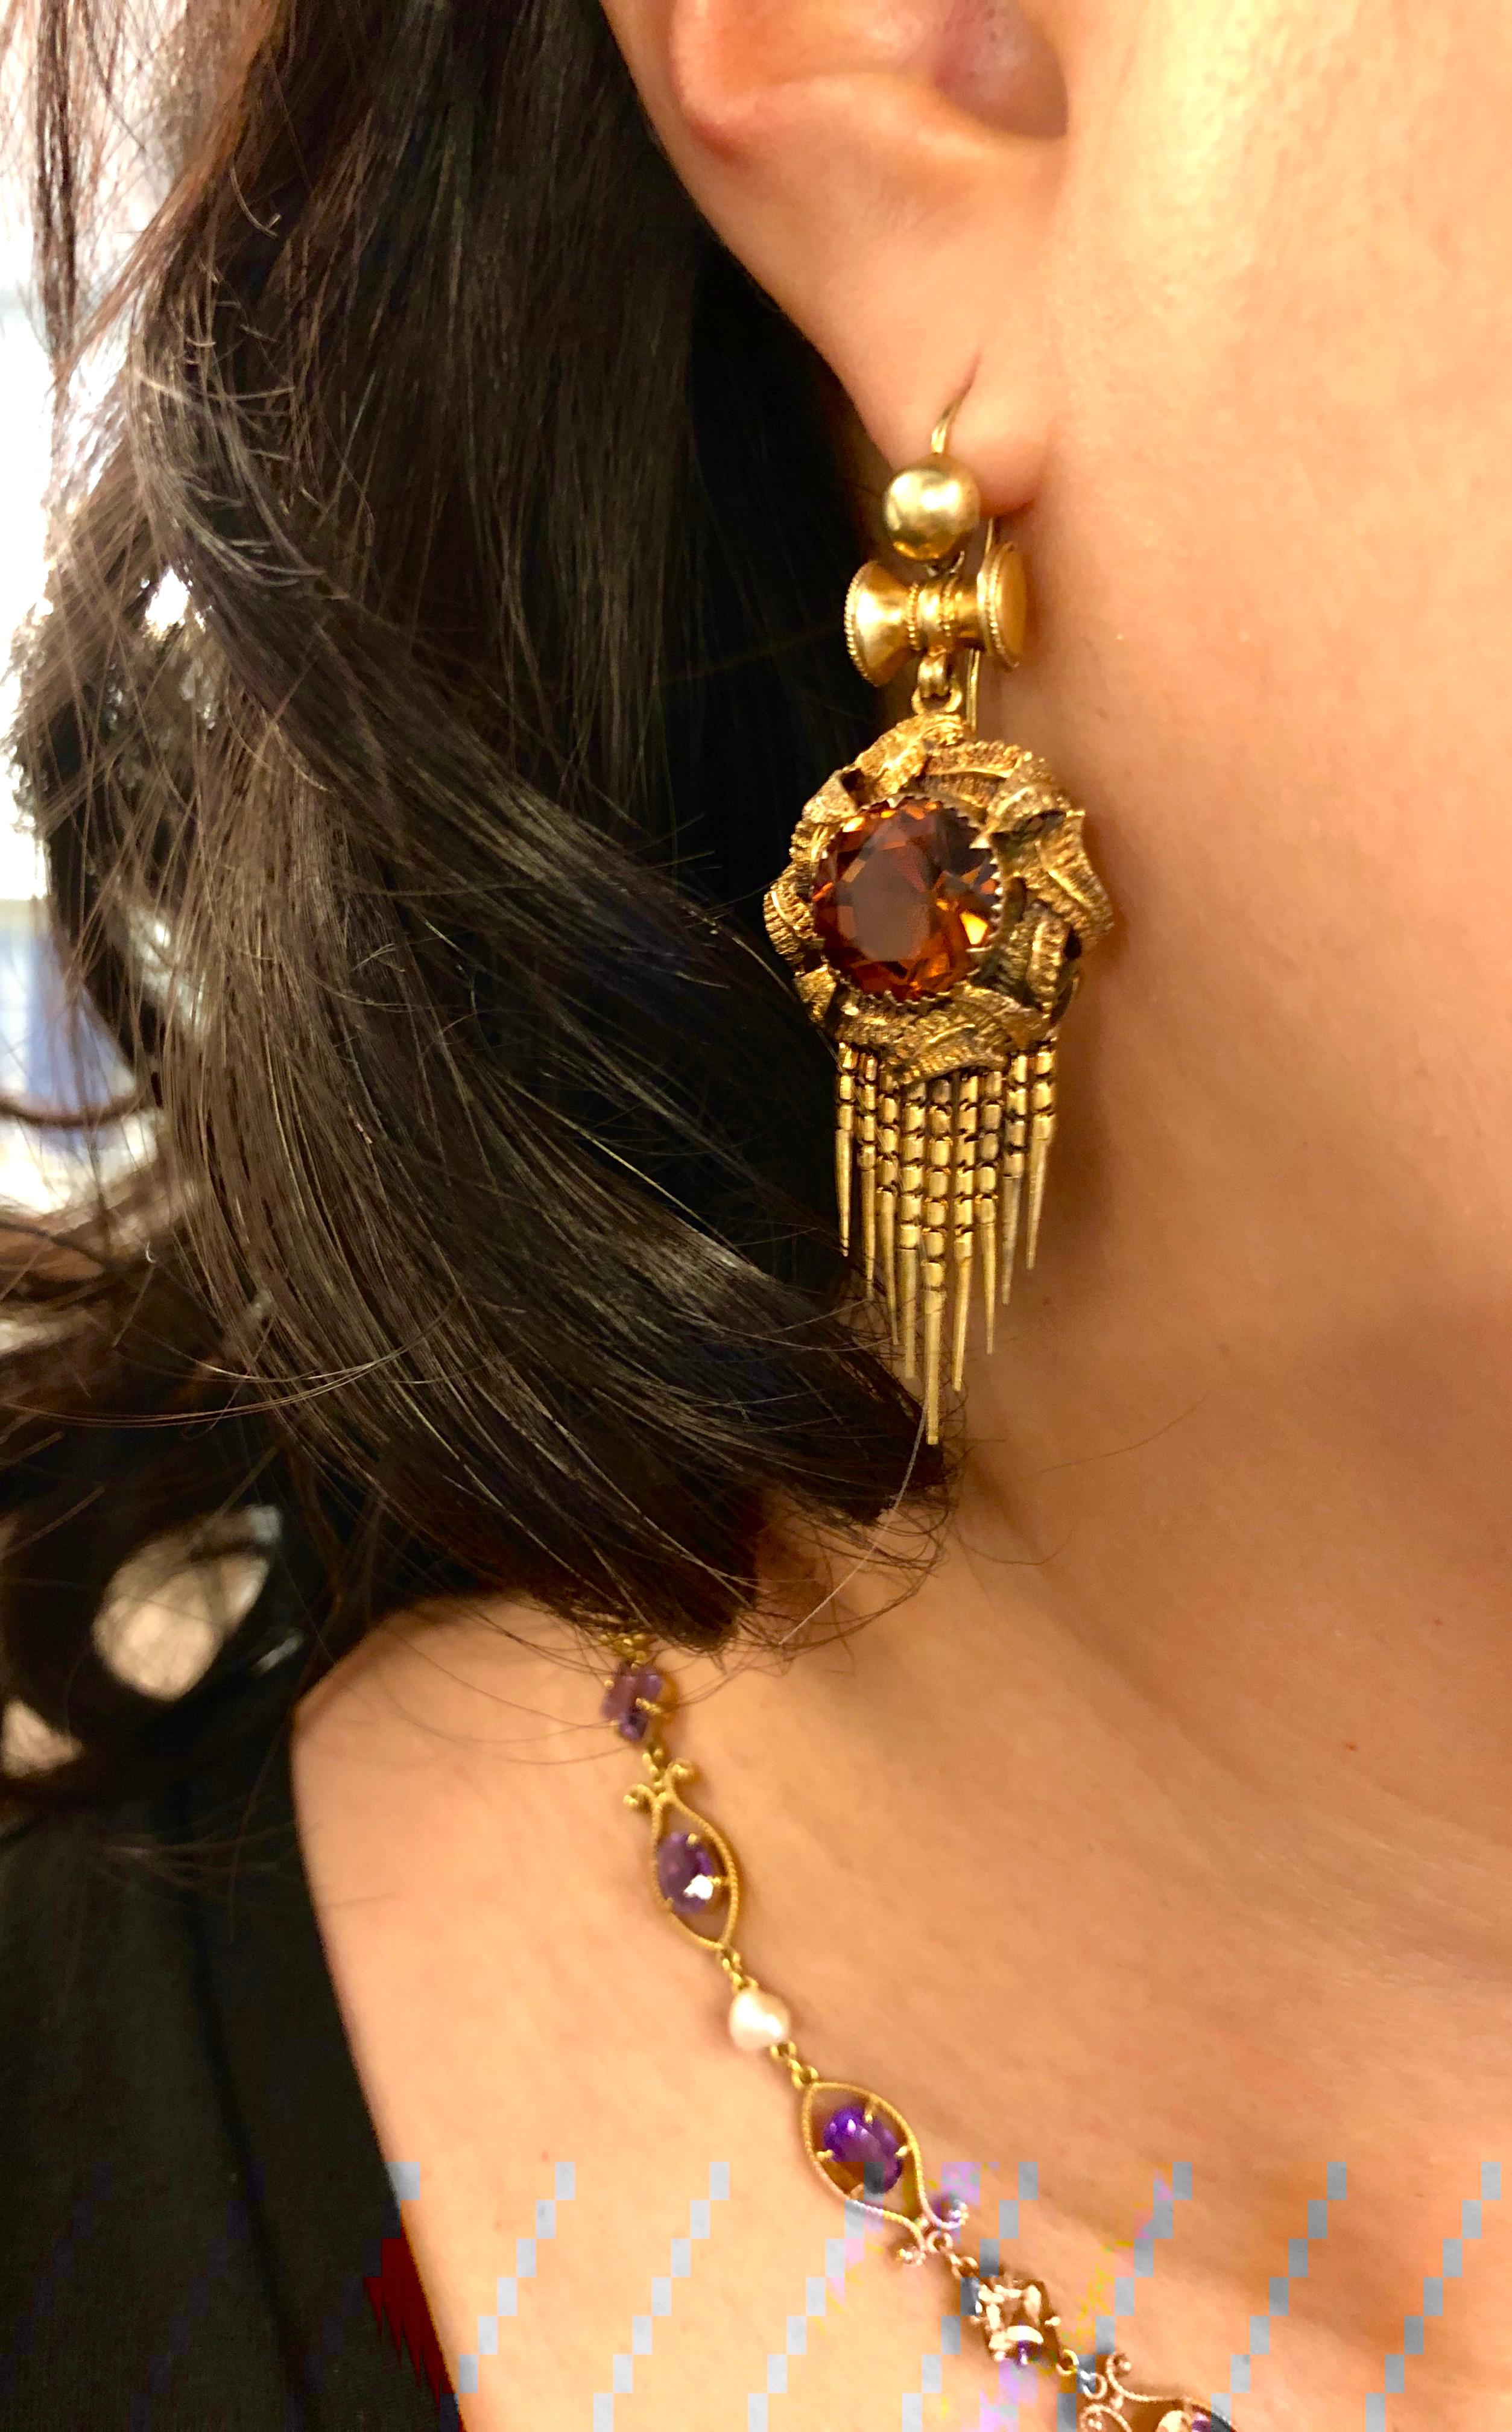 A wearable and fun pair of antique Victorian 14k gold citrine pendant fringe earrings. The earrings center upon a round citrine with a golden orange color. The citrine is surrounded by engraved gold leaves and suspend slinky darts of gold chain to